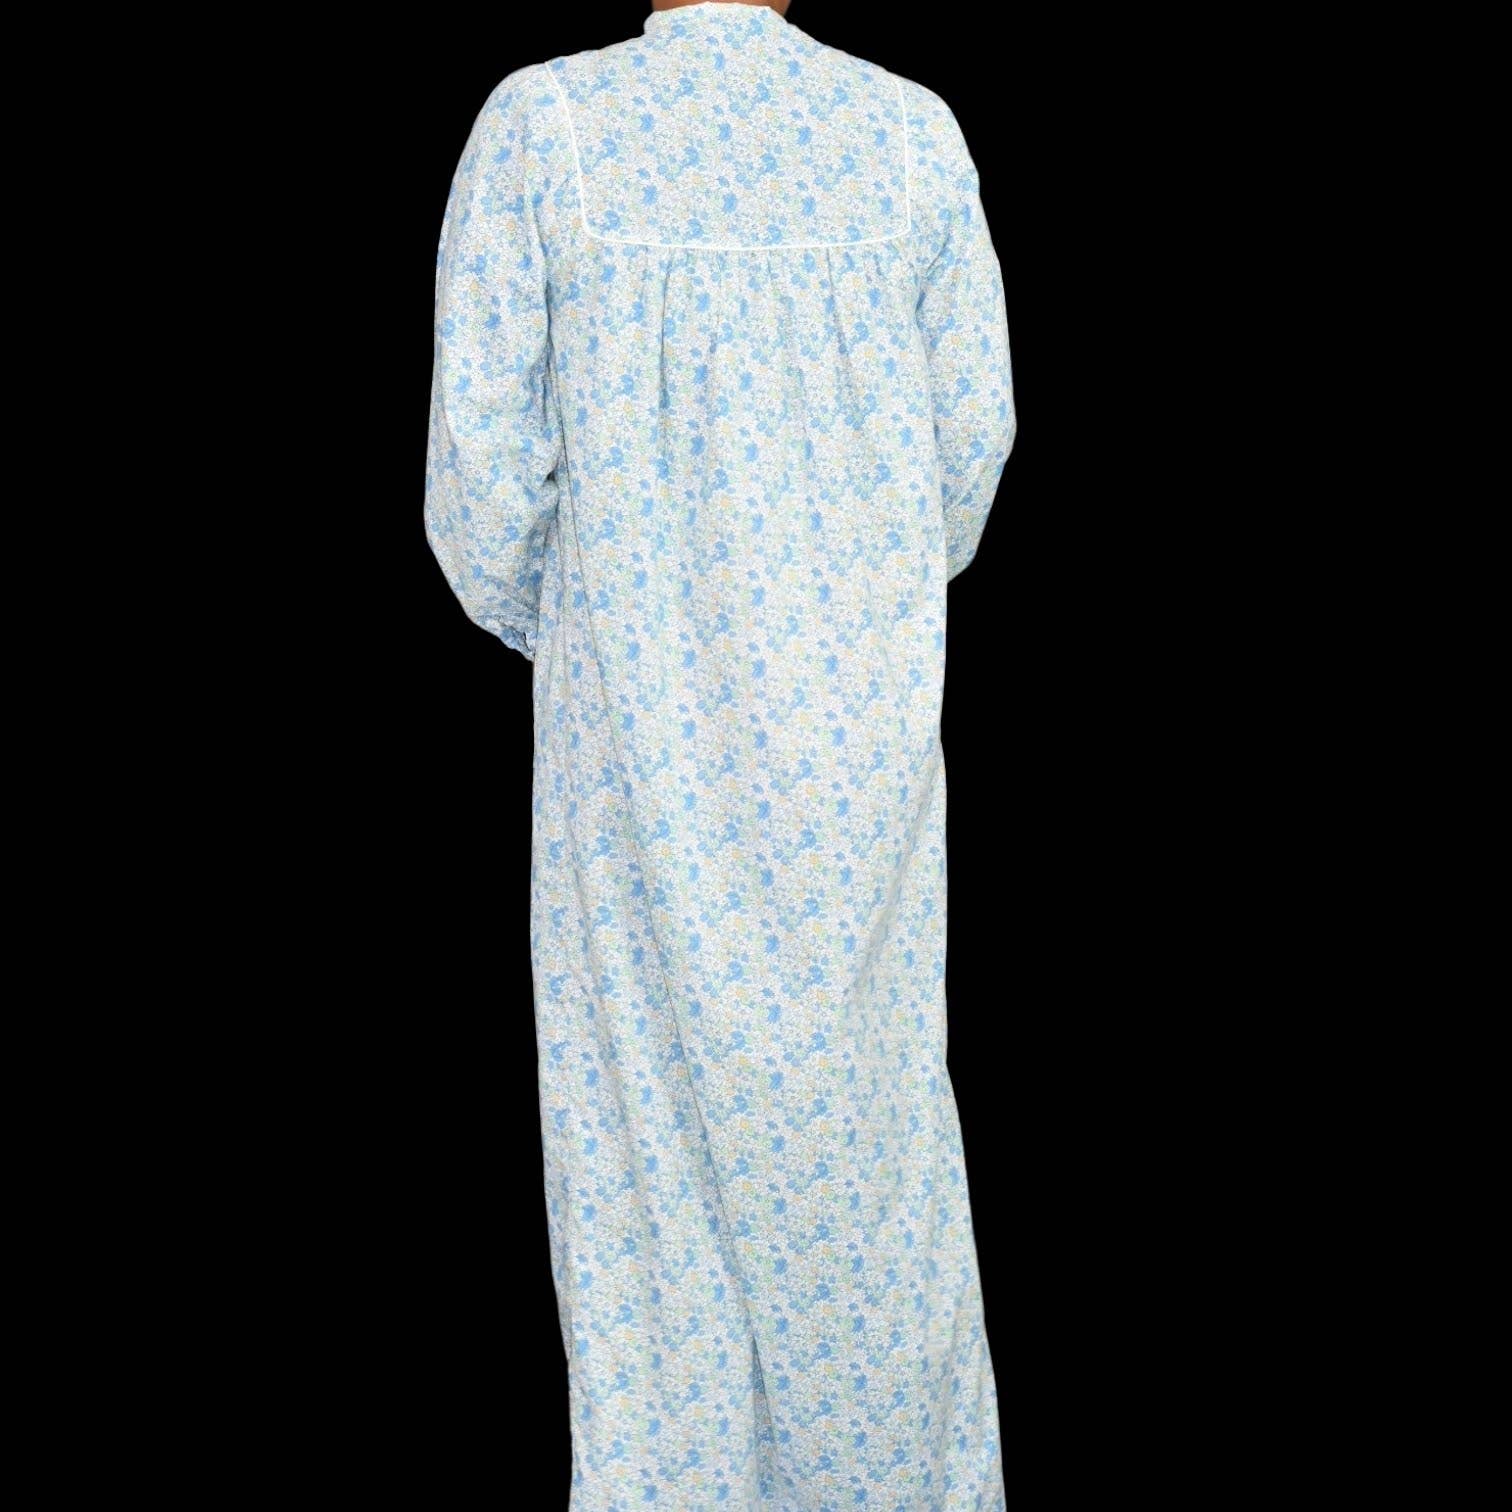 Vintage HukAPoo Housecoat Blue Floral Robe Gown Prairie Country Maxi 70s Size Small